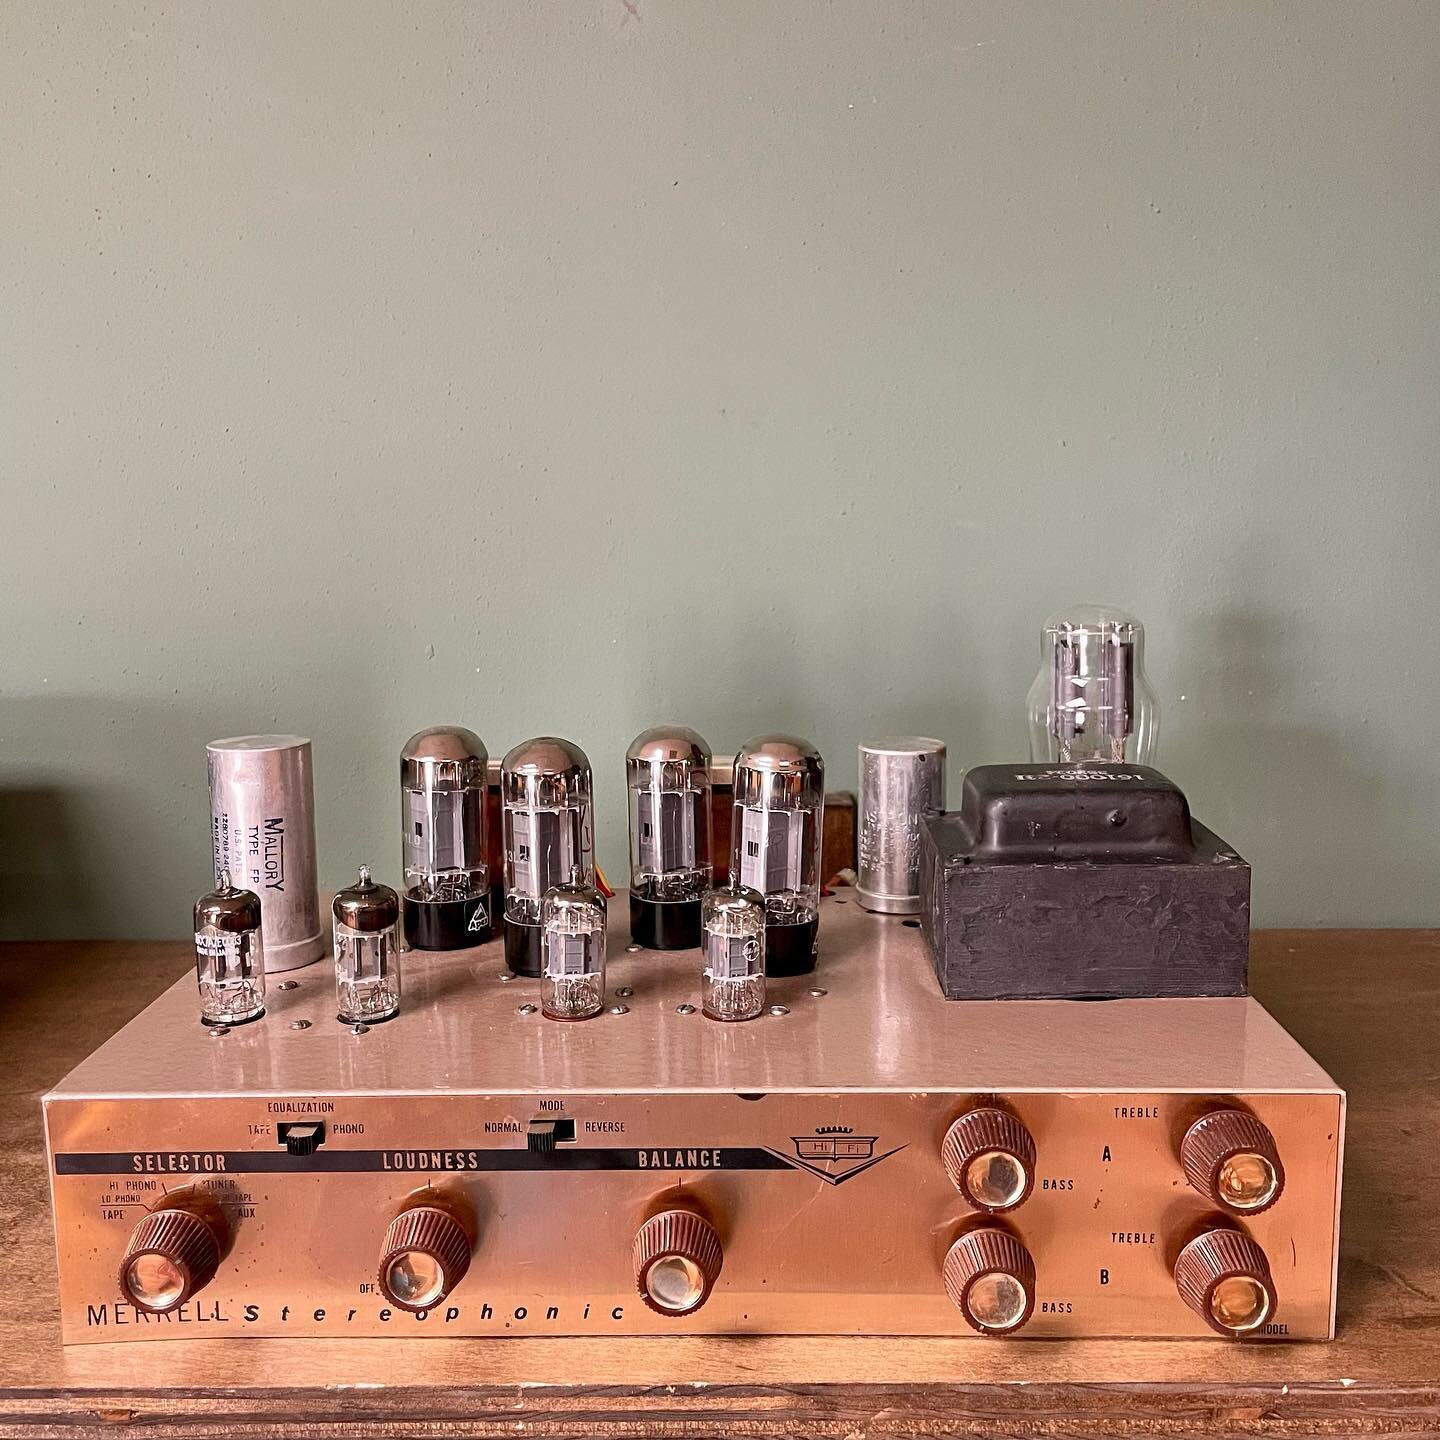 [AVAILABLE] For those of you looking to dip your toe in the waters of tube amplification, this Merrell integrated amplifier is a great option.
Pushing a ⚡️MIGHTY⚡️ 15 watts per channel this little powerhouse would be a perfect match for a bedroom, of